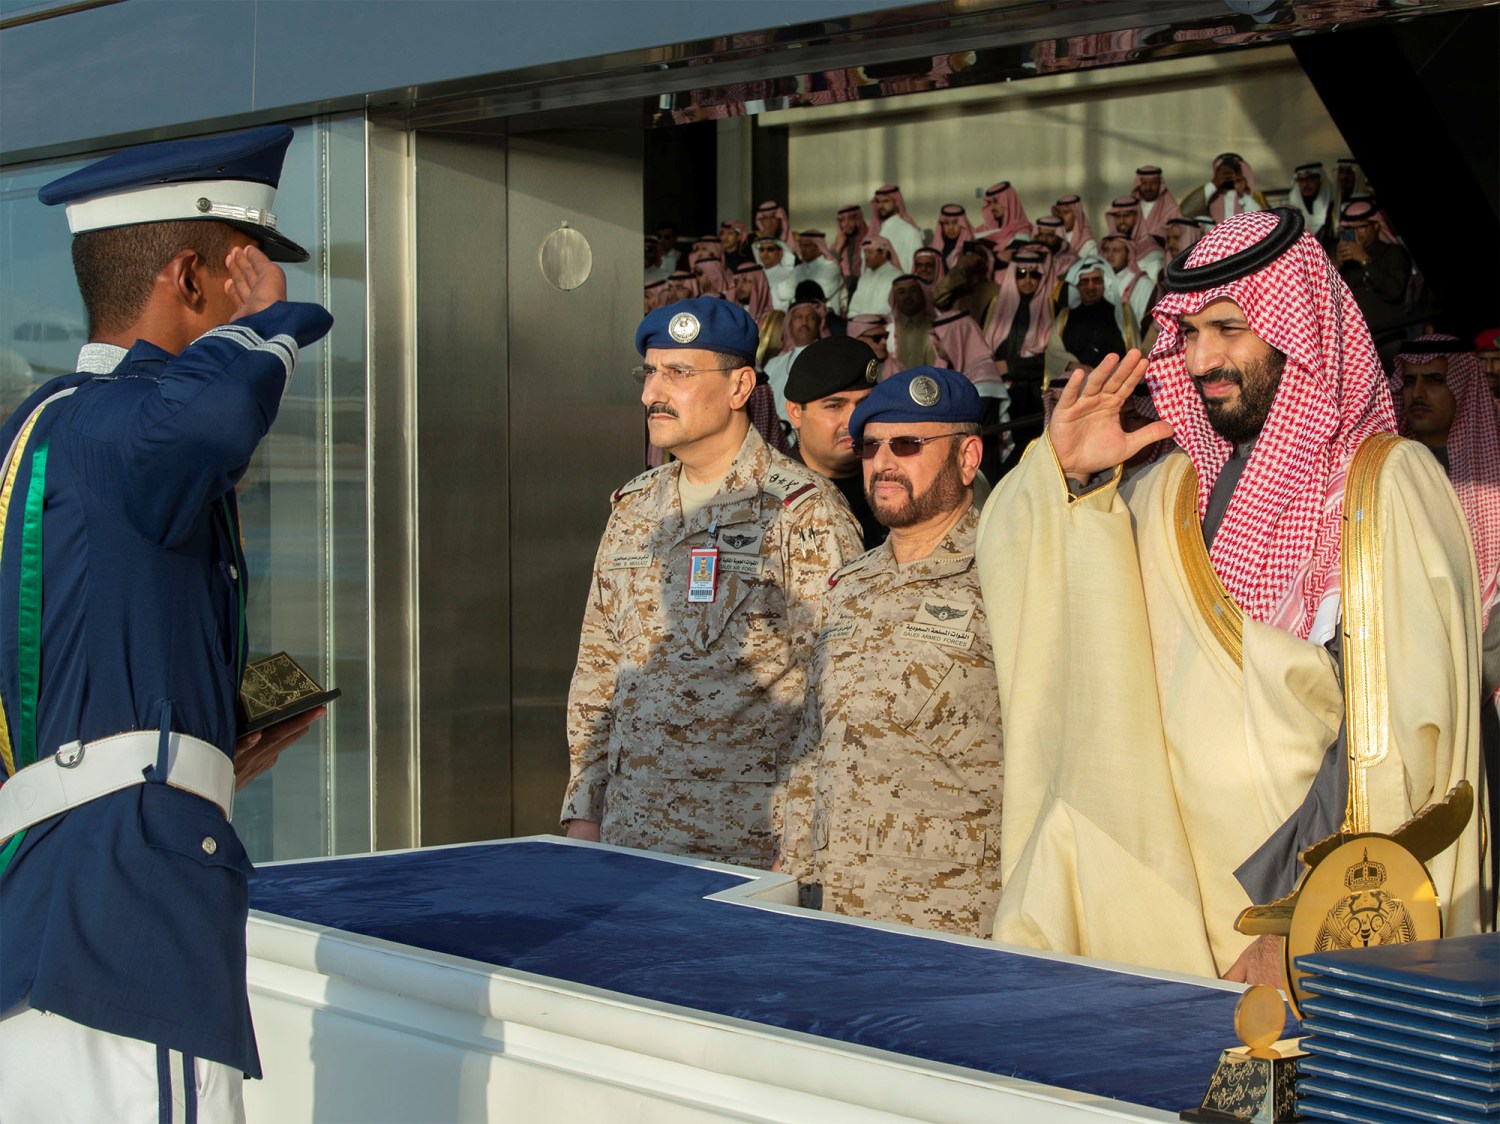 Saudi Arabia's Crown Prince Mohammed bin Salman attends a graduation ceremony for the 95th batch of cadets from the King Faisal Air Academy in Riyadh, Saudi Arabia December 23, 2018. Picture taken December 23, 2018. Bandar Algaloud/Courtesy of Saudi Royal Court/Handout via REUTERS ATTENTION EDITORS - THIS PICTURE WAS PROVIDED BY A THIRD PARTY. - RC1B24ACE450